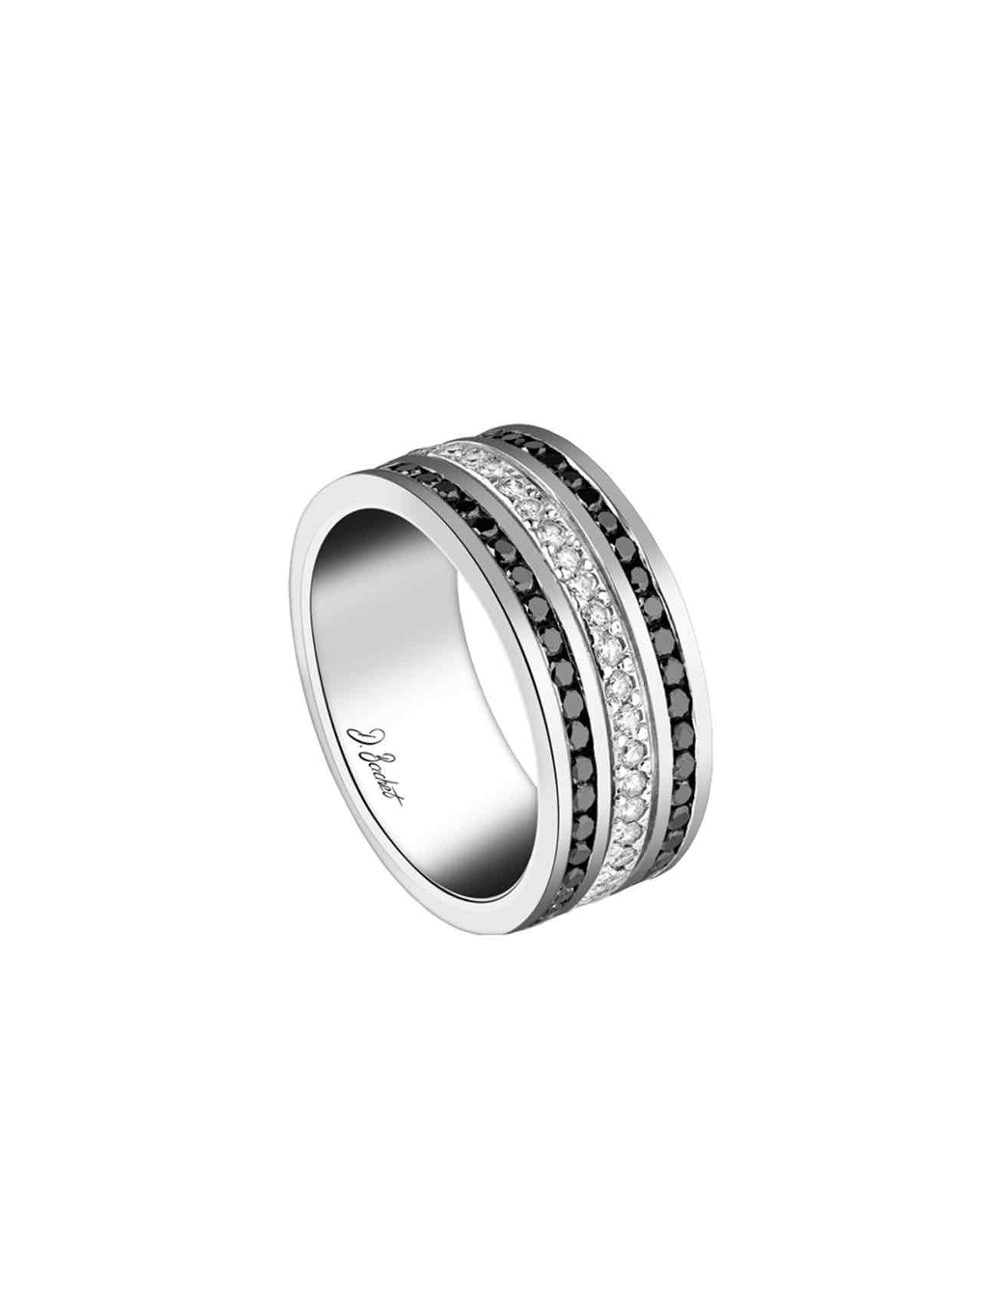 Luxury unisex ring in platinum and set all around with white and black diamonds